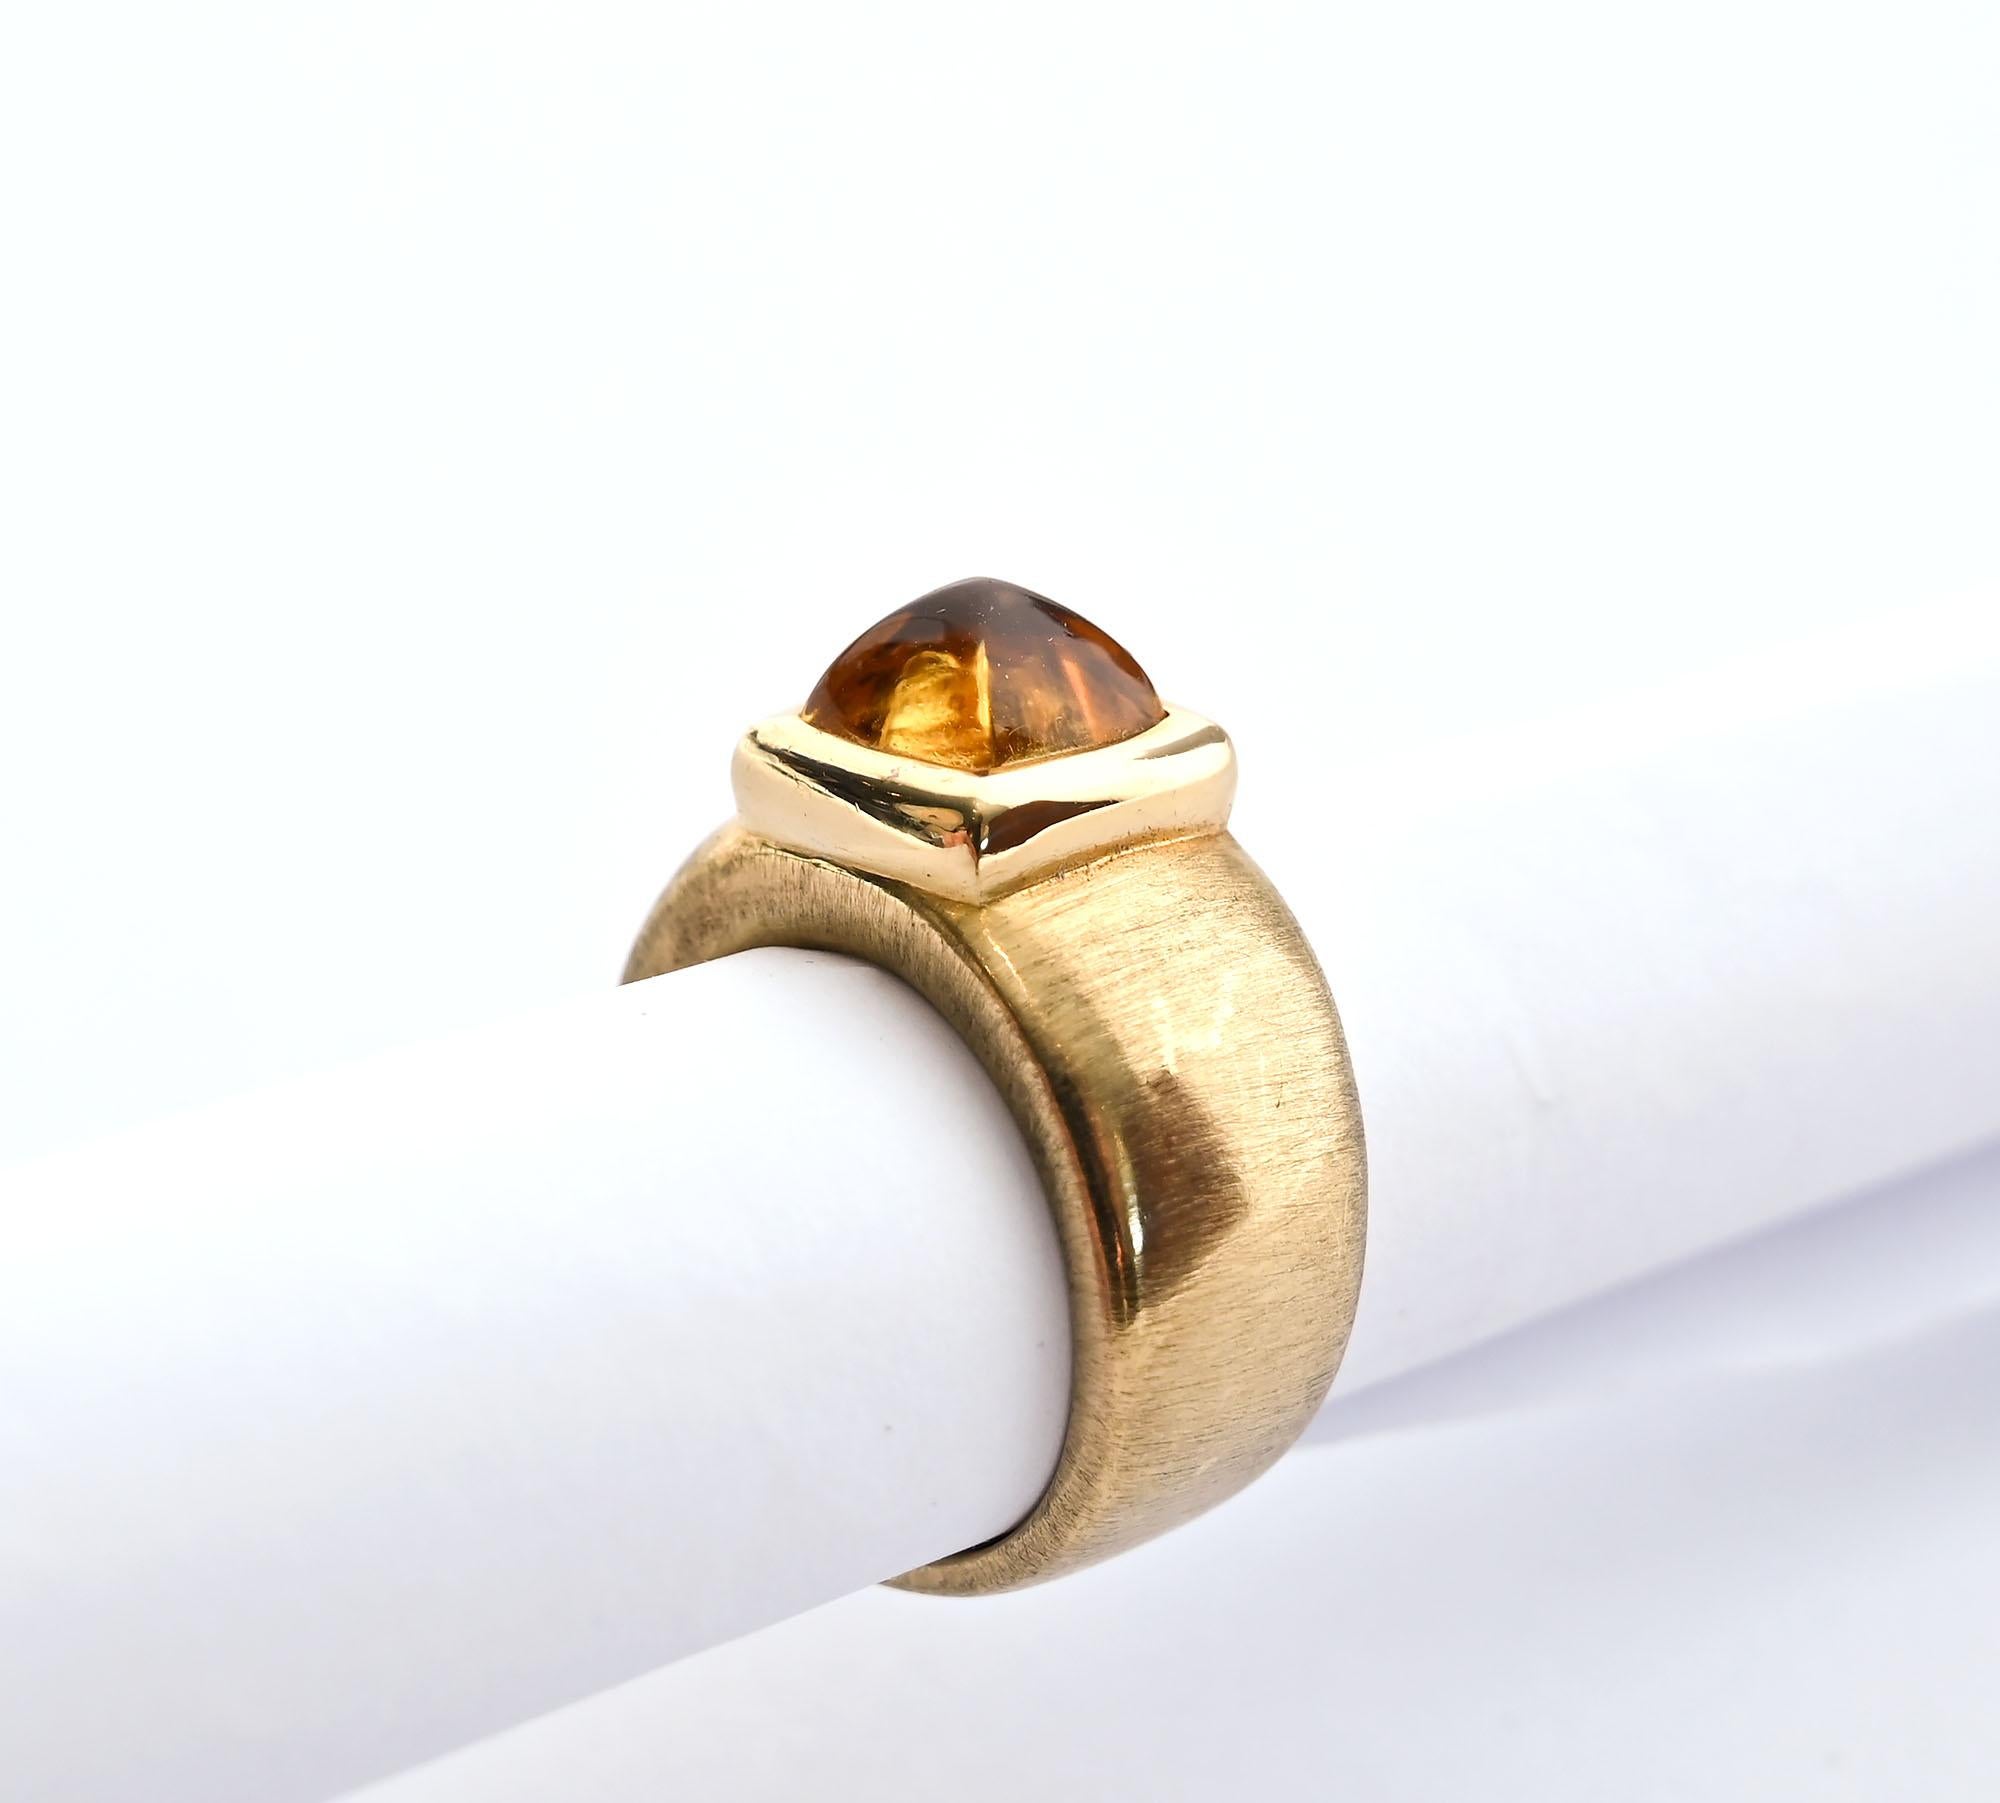 Gold and citrine ring by American designer, Robert Bielka.  Bielka arrived in New York in 1975 where he worked for Cartier. In 1979, he began his own firm where he sold to such notables as Tiffany; Van Cleef and Arpels and Harry Winston.
This heavy